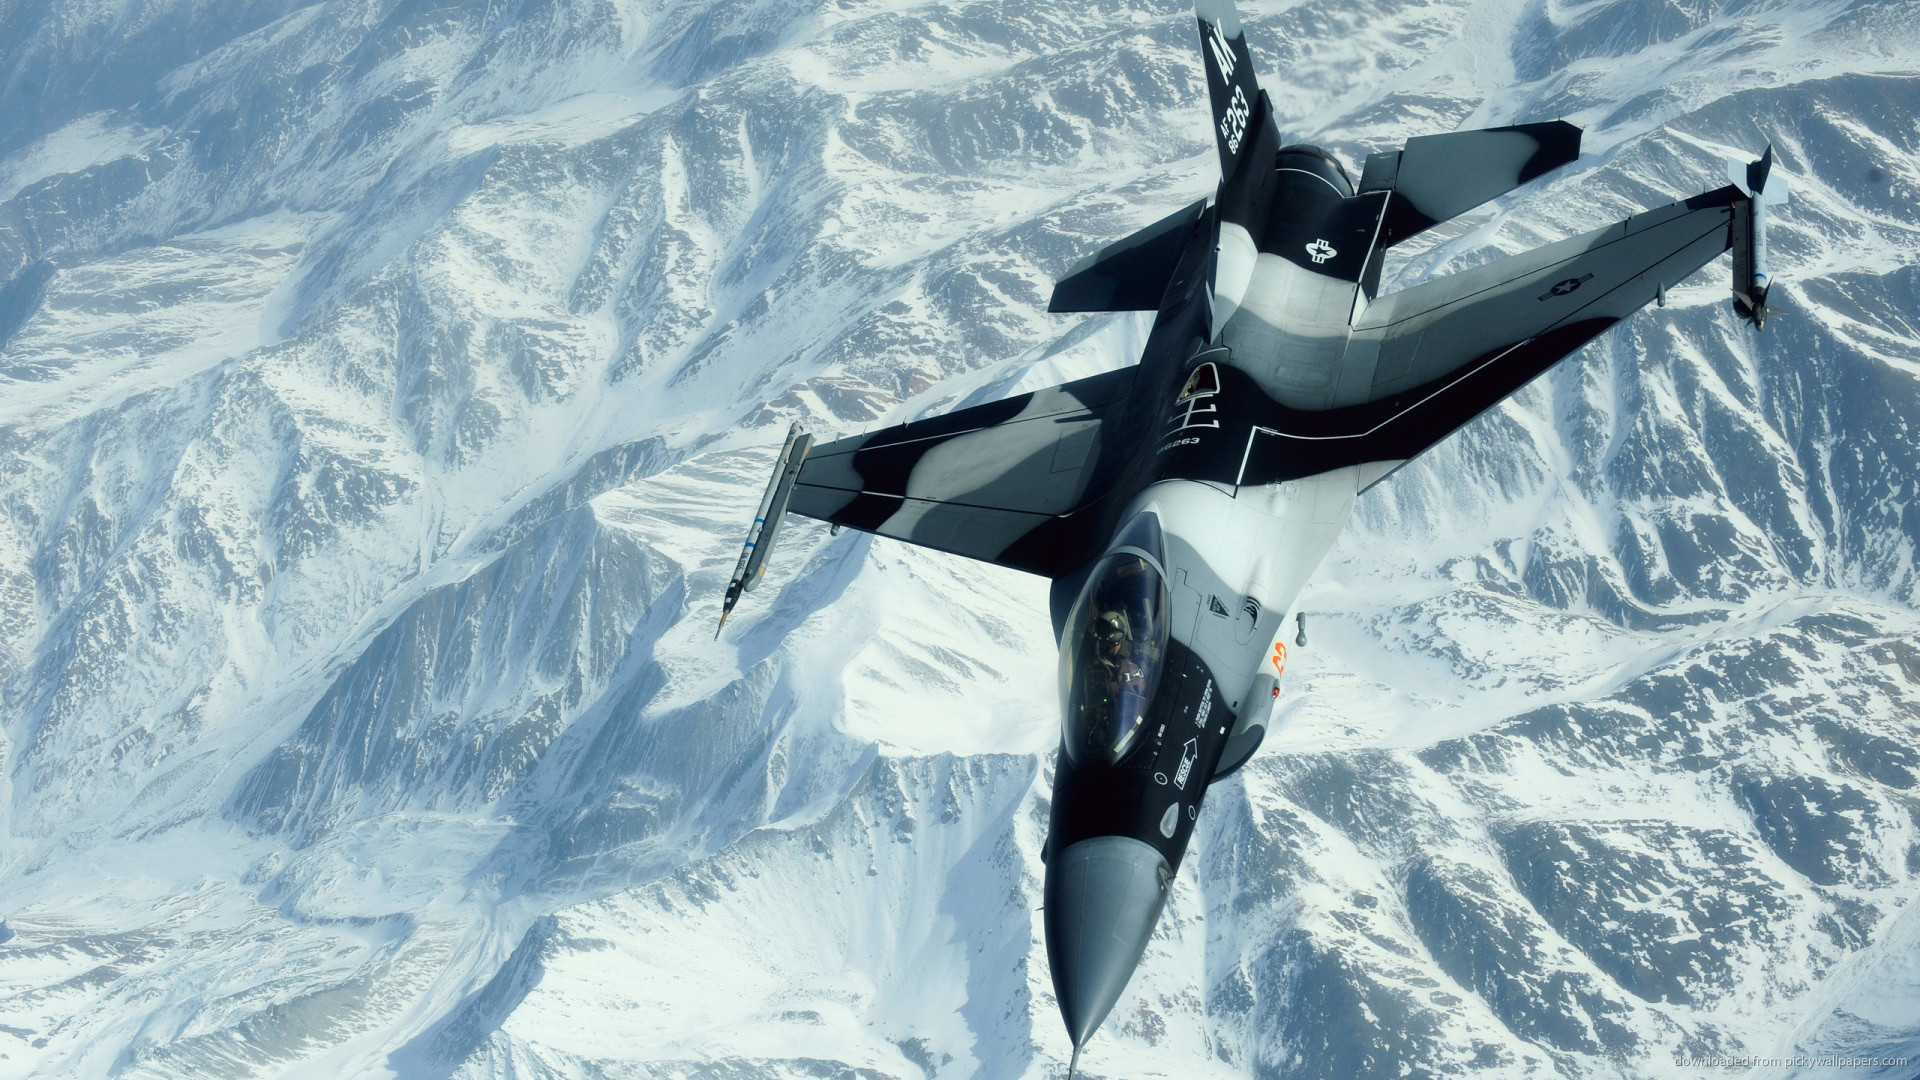 1920x1080 F16 over snowy mountains picture